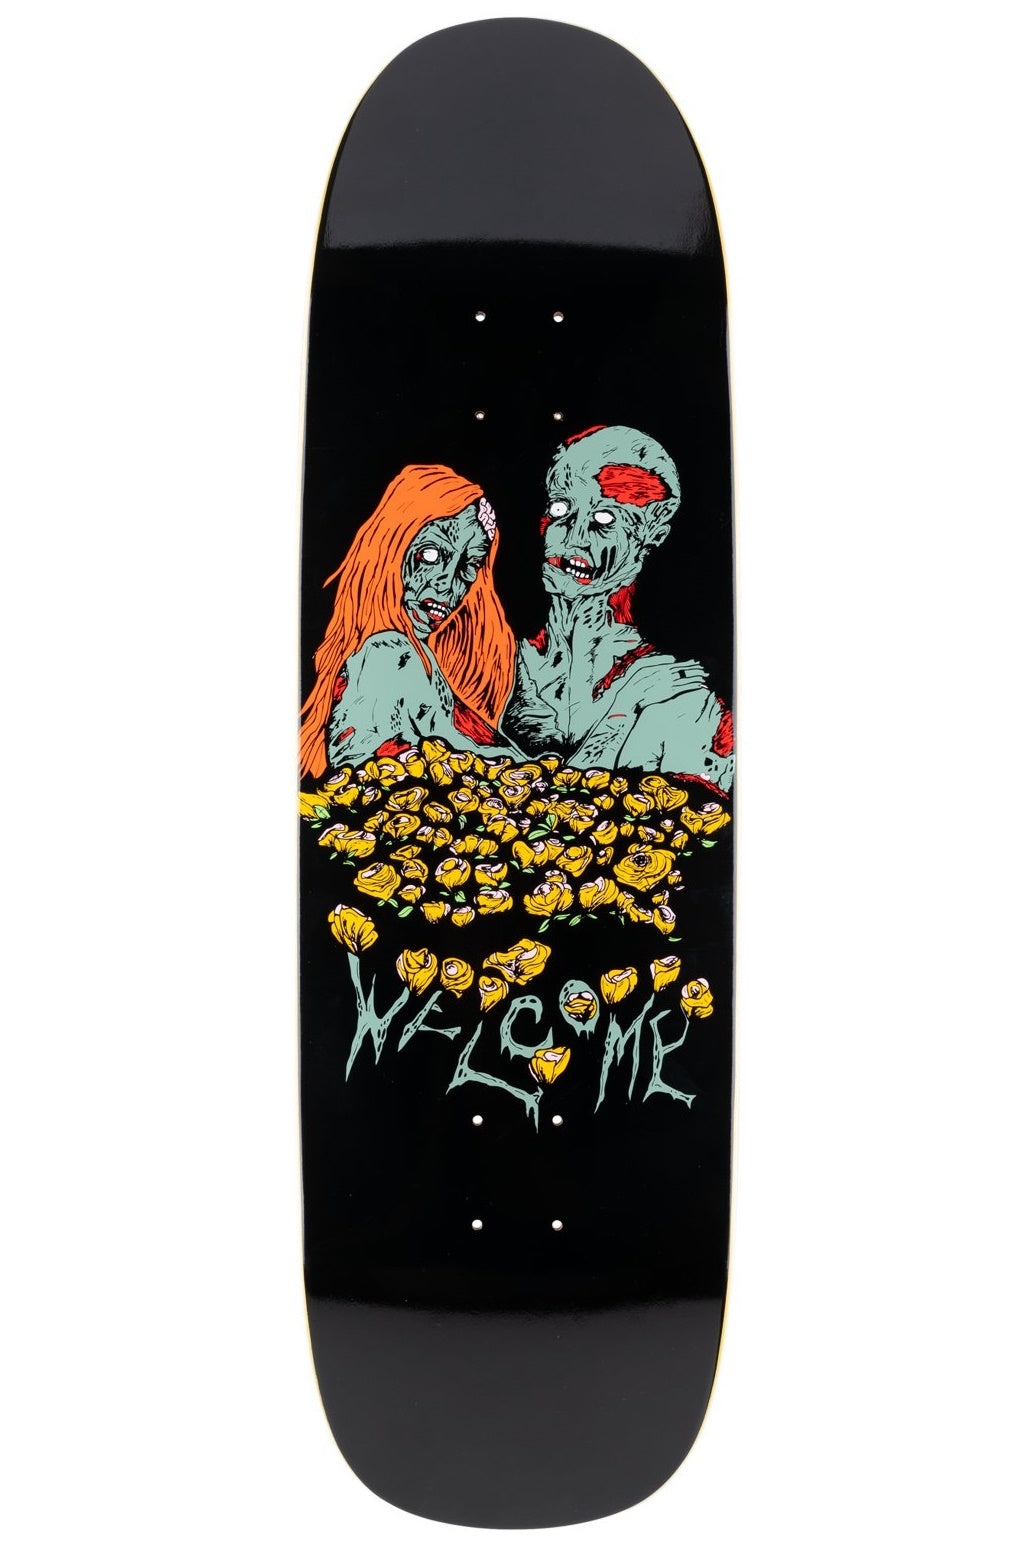 WELCOME Zombie Love on Boline Deck 9.25"